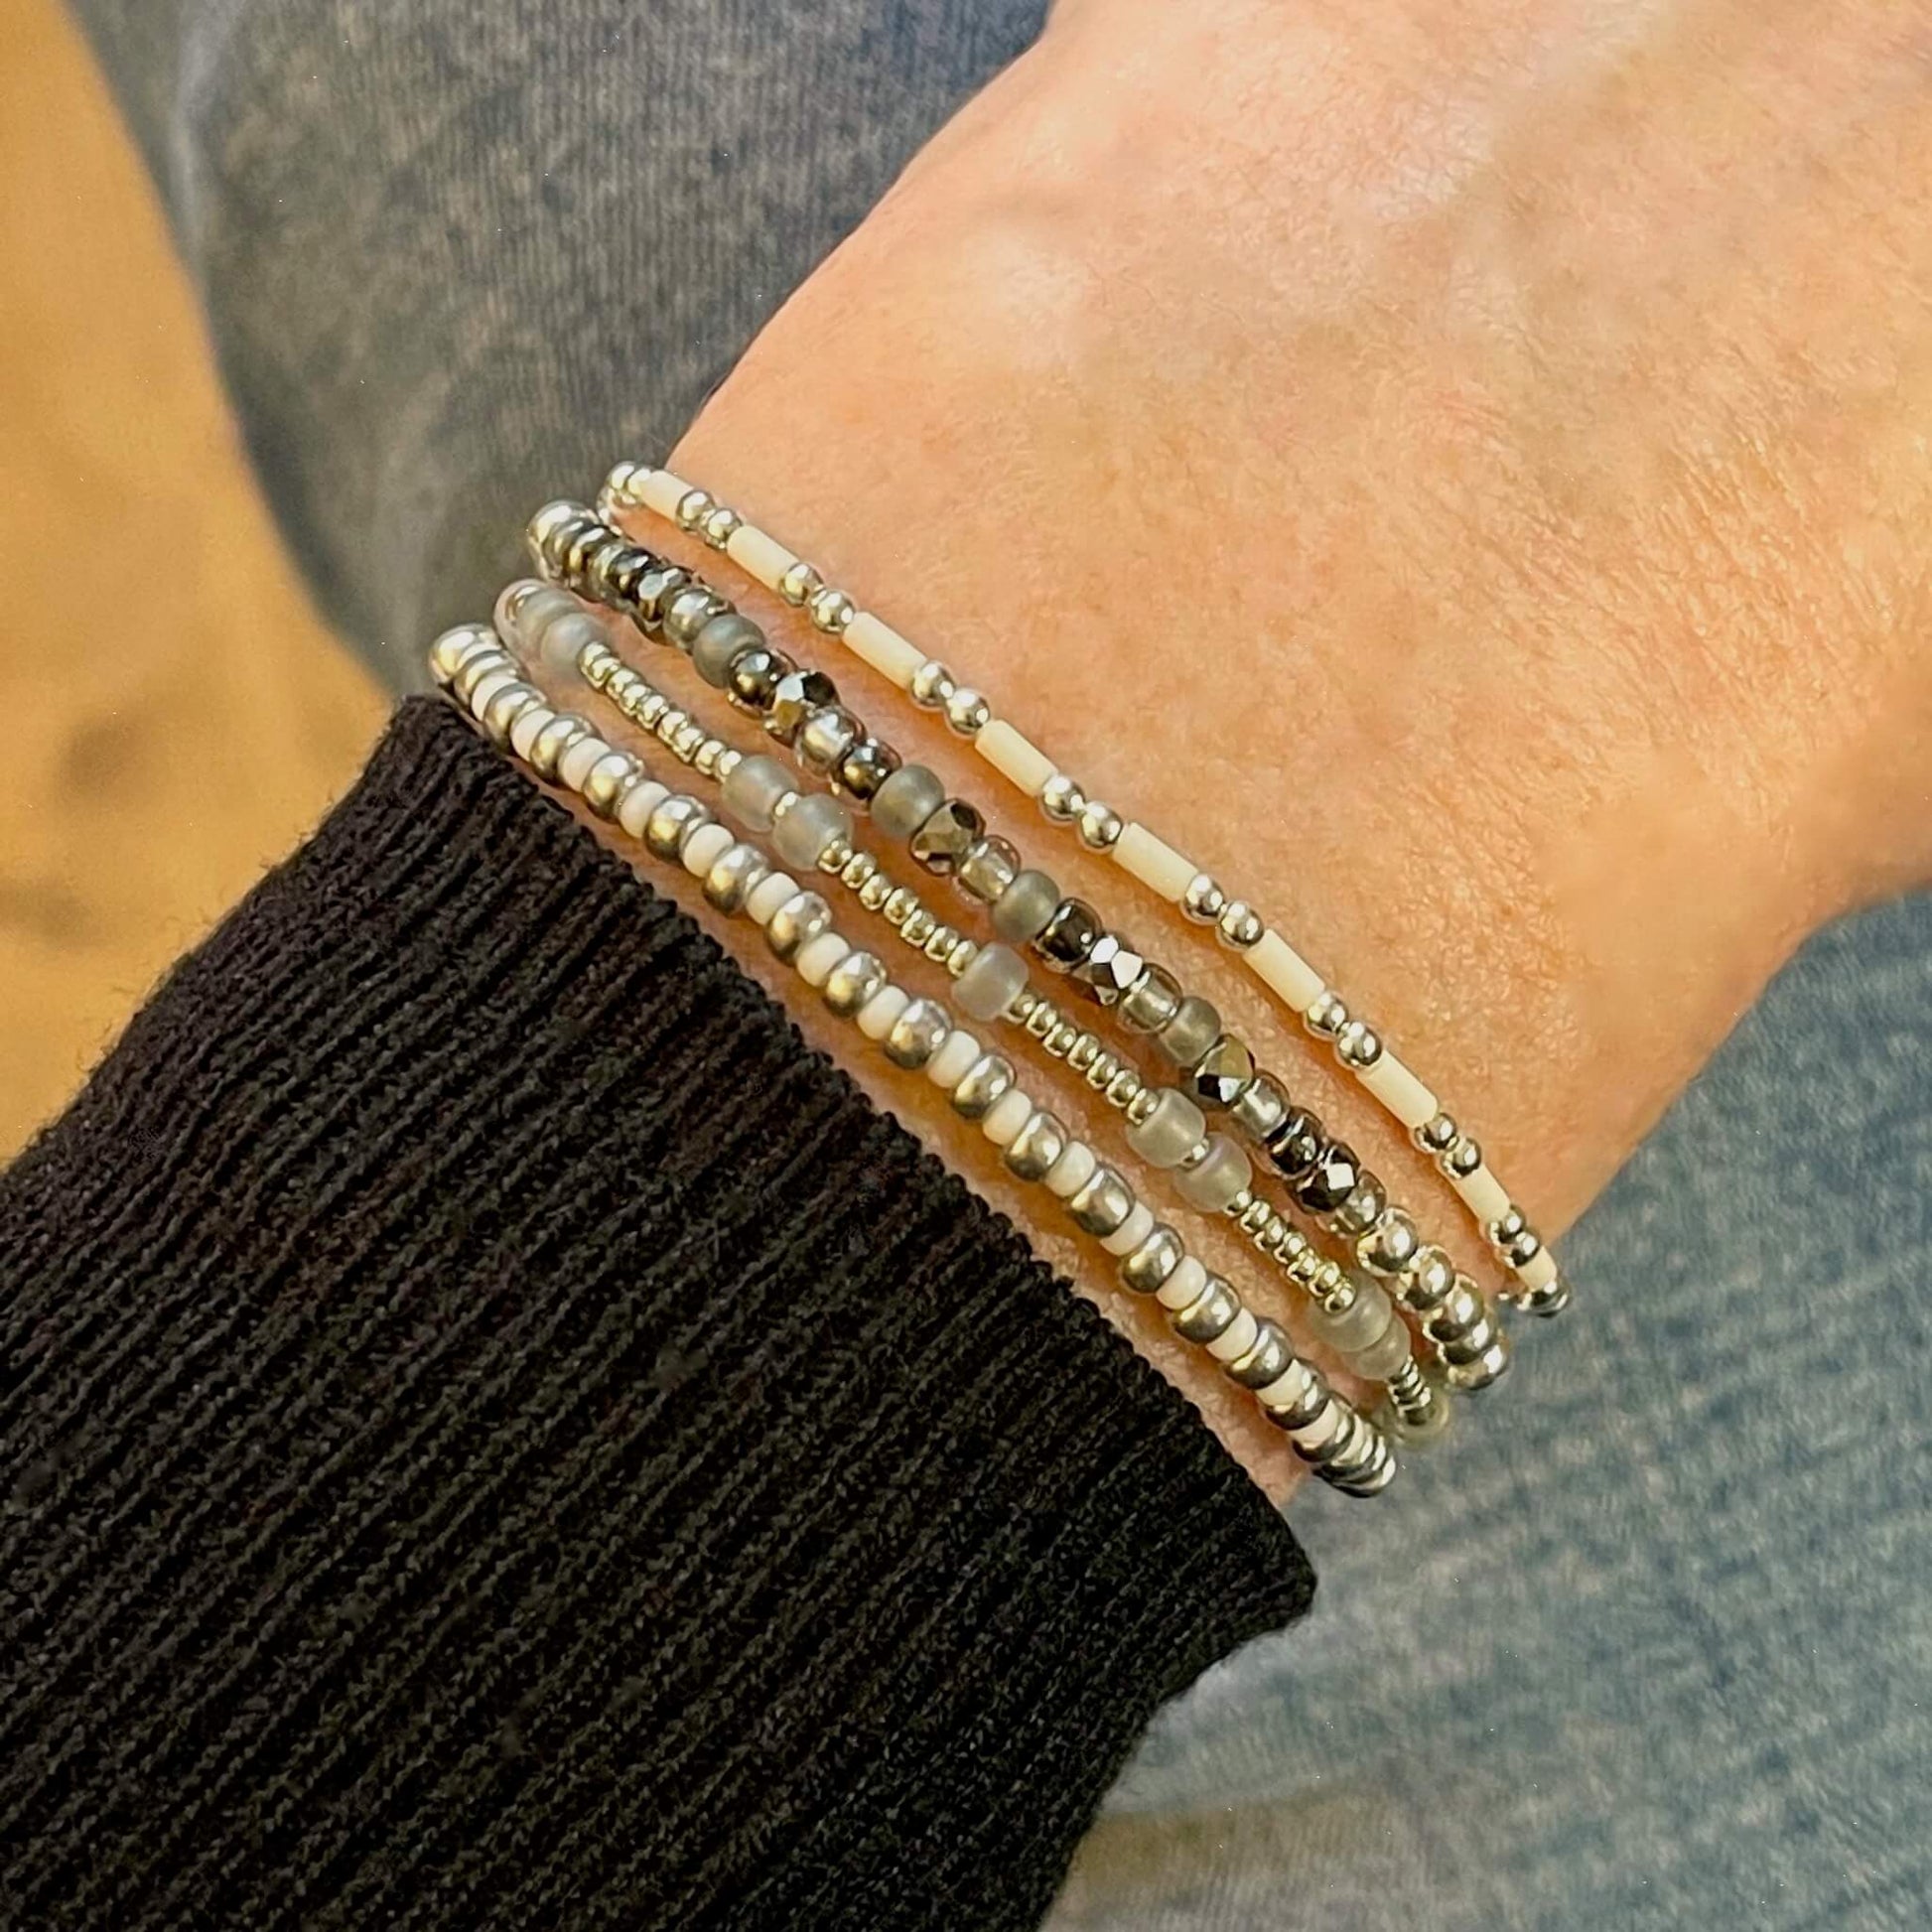 Silver seed bead bracelet stack of 4 stretch bracelets for women with grey and white accents. Handmade in NYC.